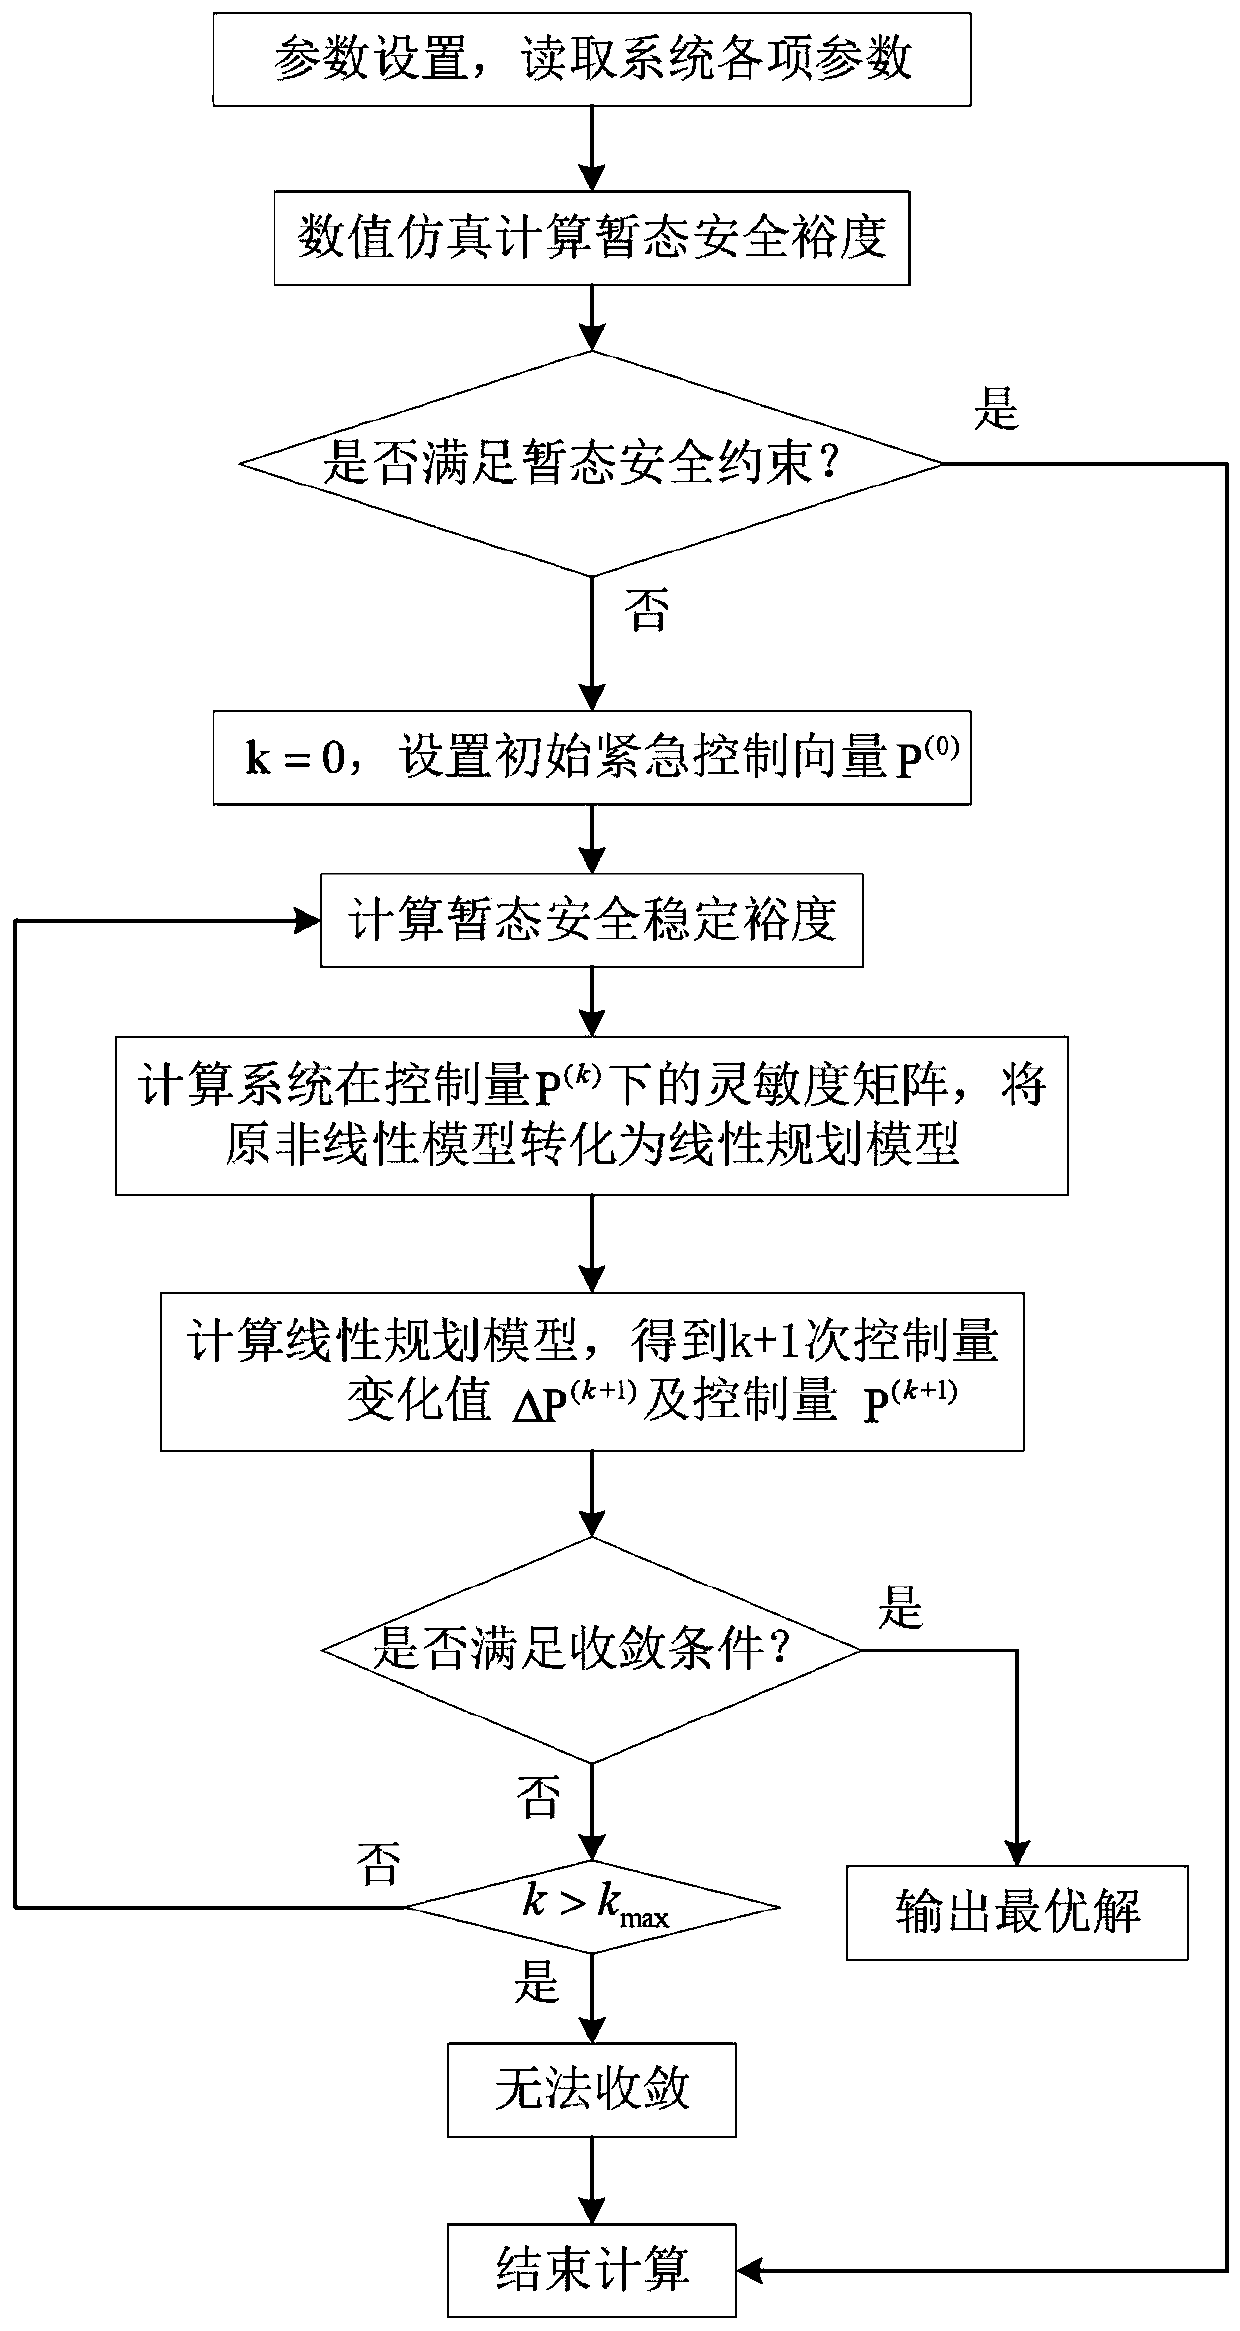 Multi-DC feed-in receiving end power grid emergency control optimization method and system